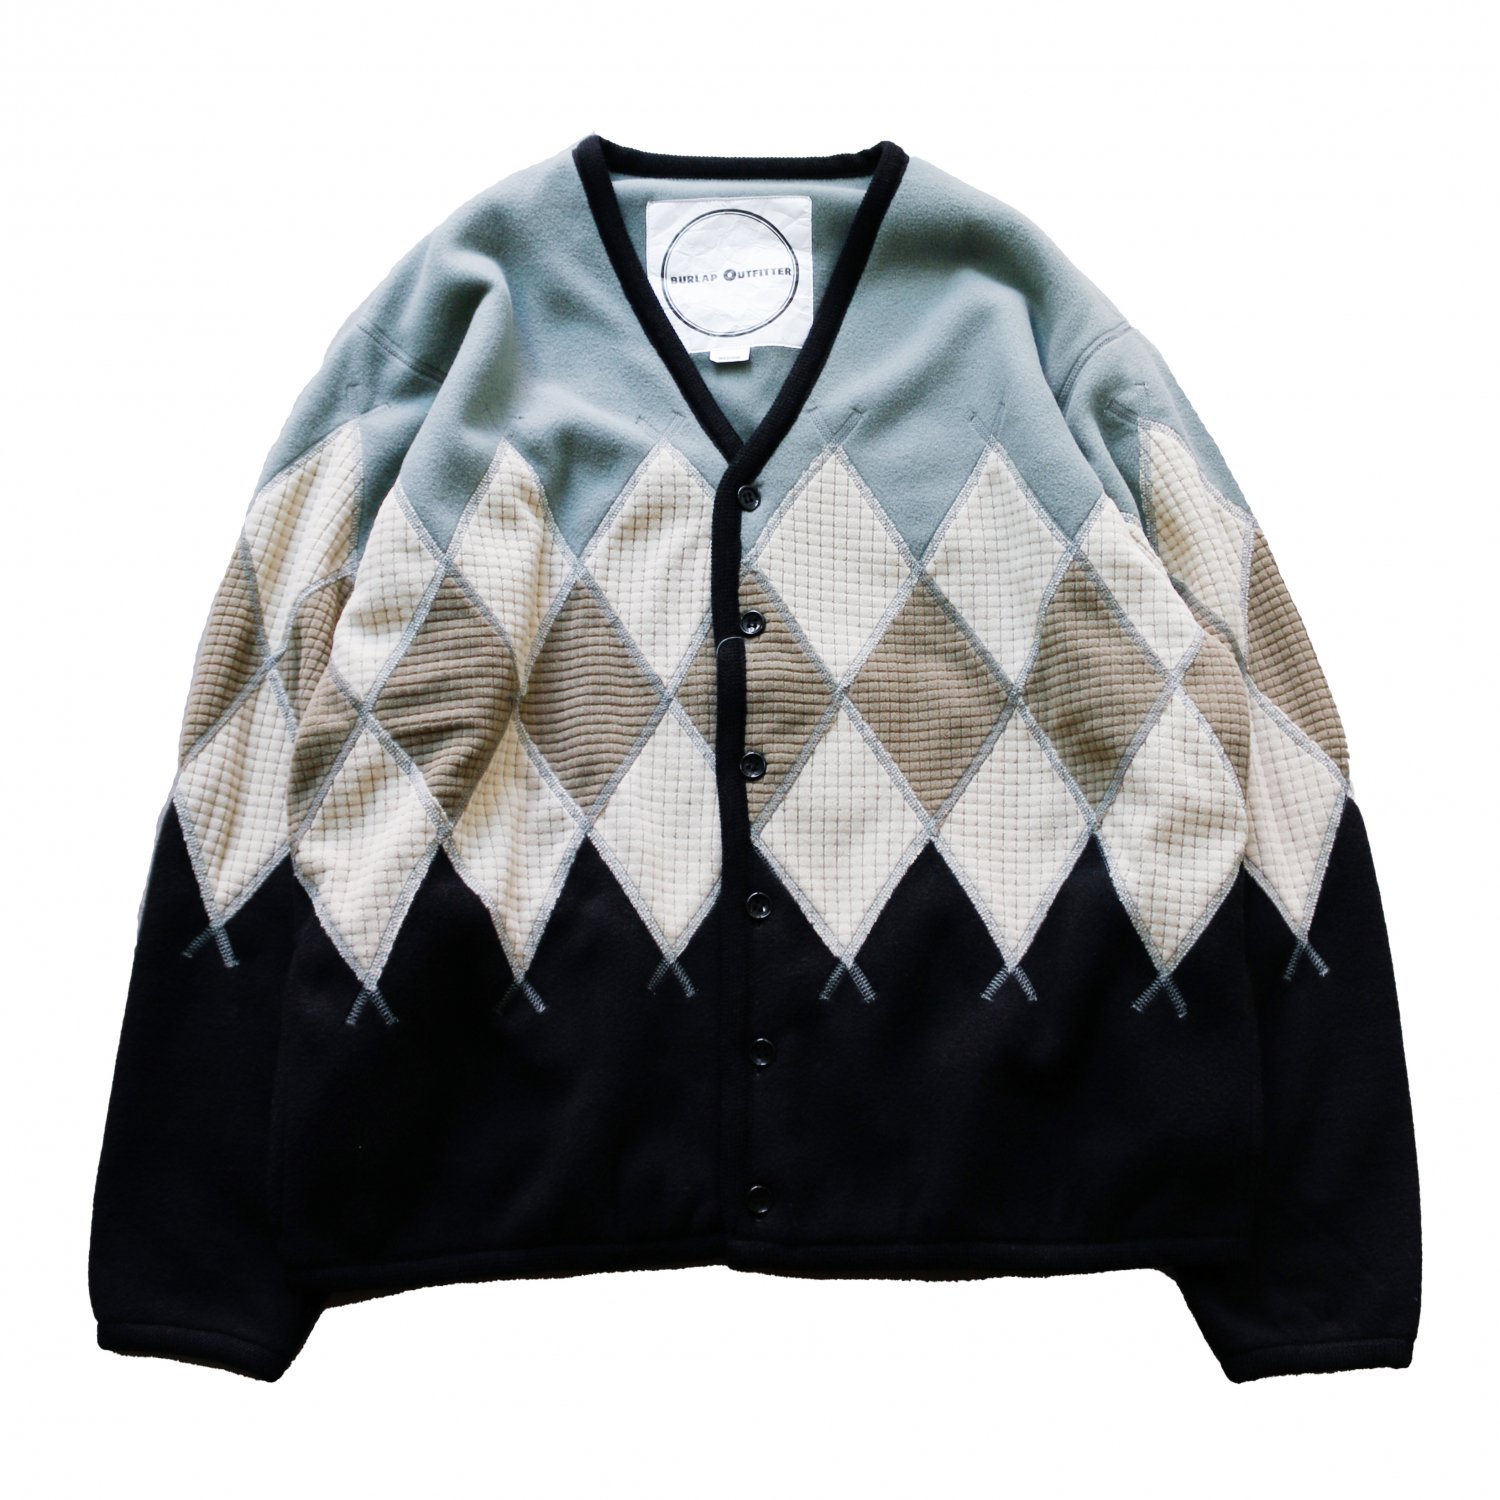 <img class='new_mark_img1' src='https://img.shop-pro.jp/img/new/icons8.gif' style='border:none;display:inline;margin:0px;padding:0px;width:auto;' />BURLAP OUTFITTER / ARGYLE FLEECE CARDIGAN